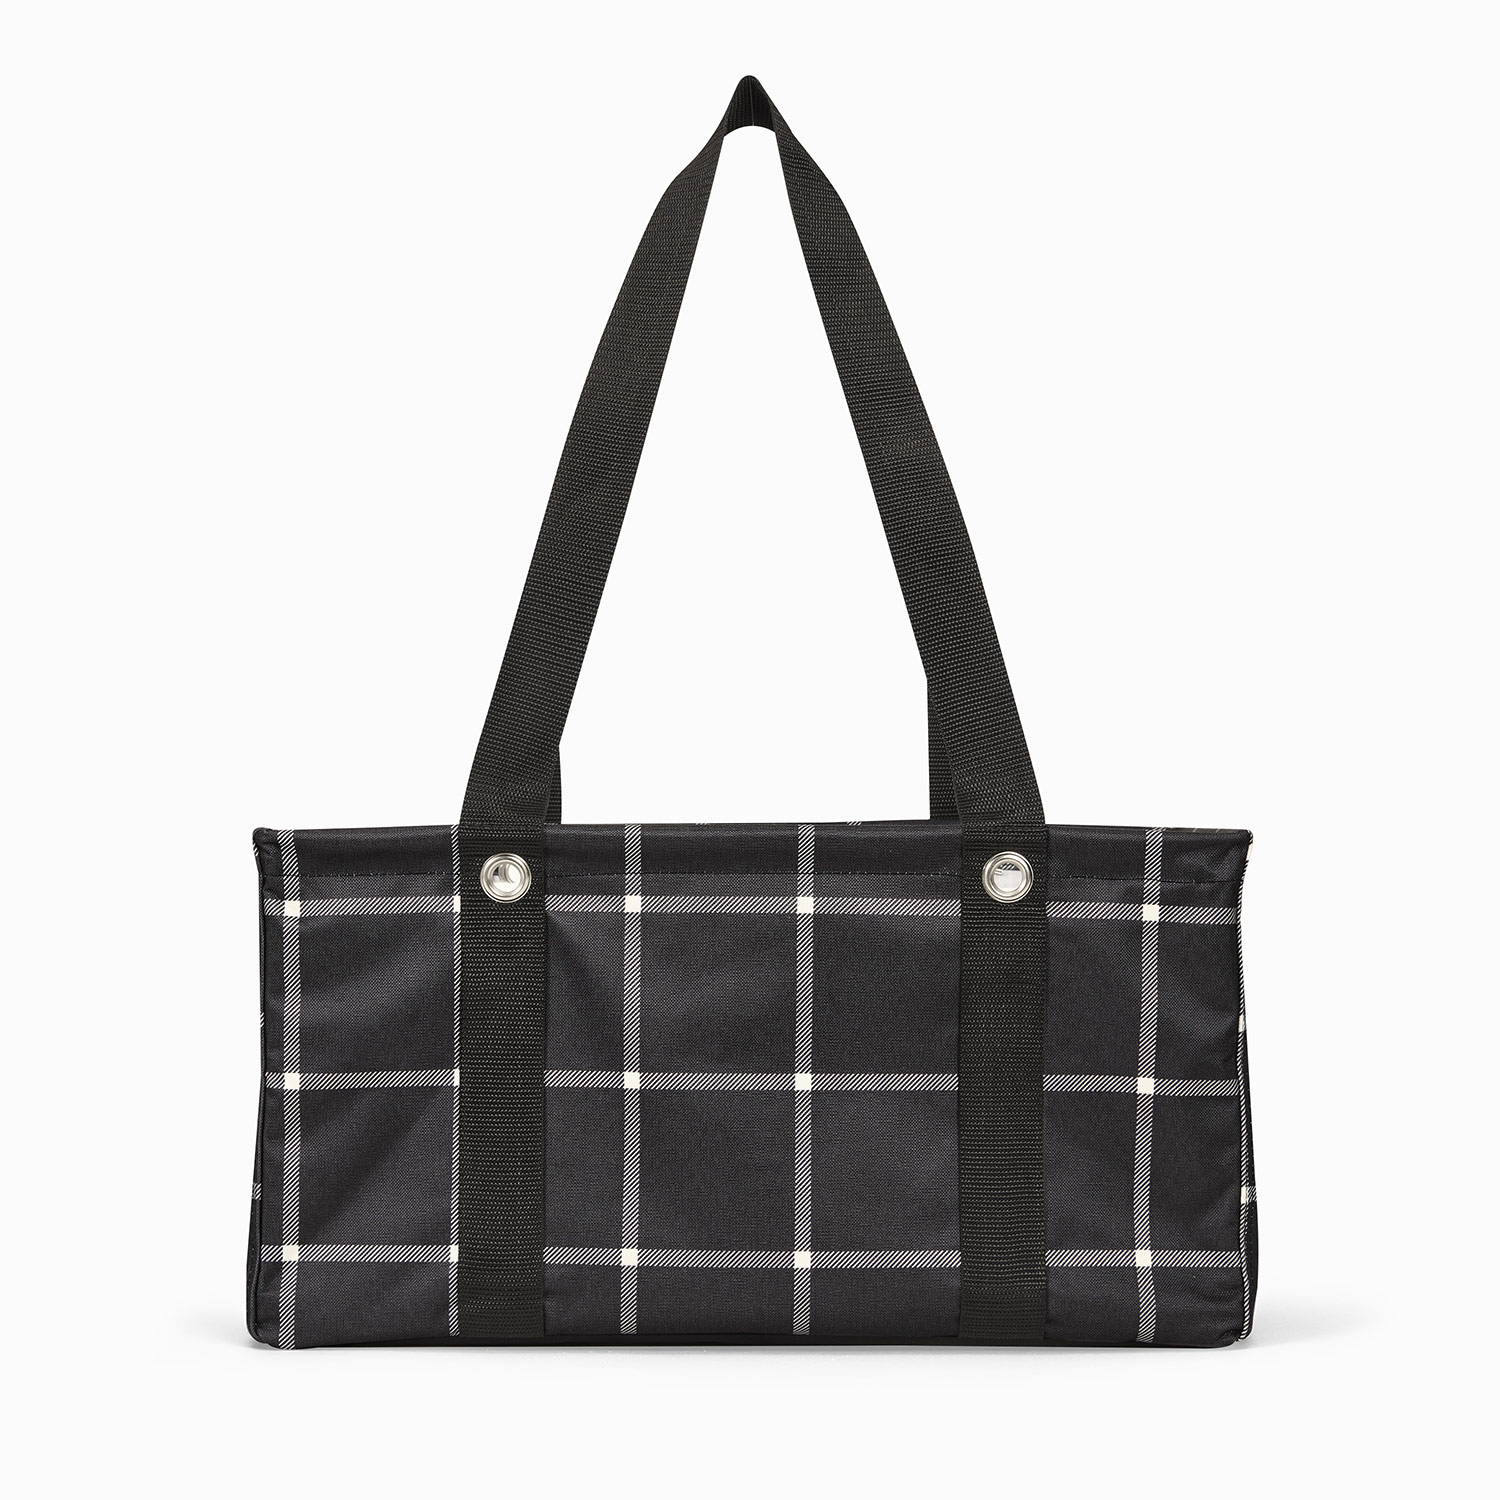 Charcoal Crosshatch - Medium Utility Tote - Thirty-One Gifts